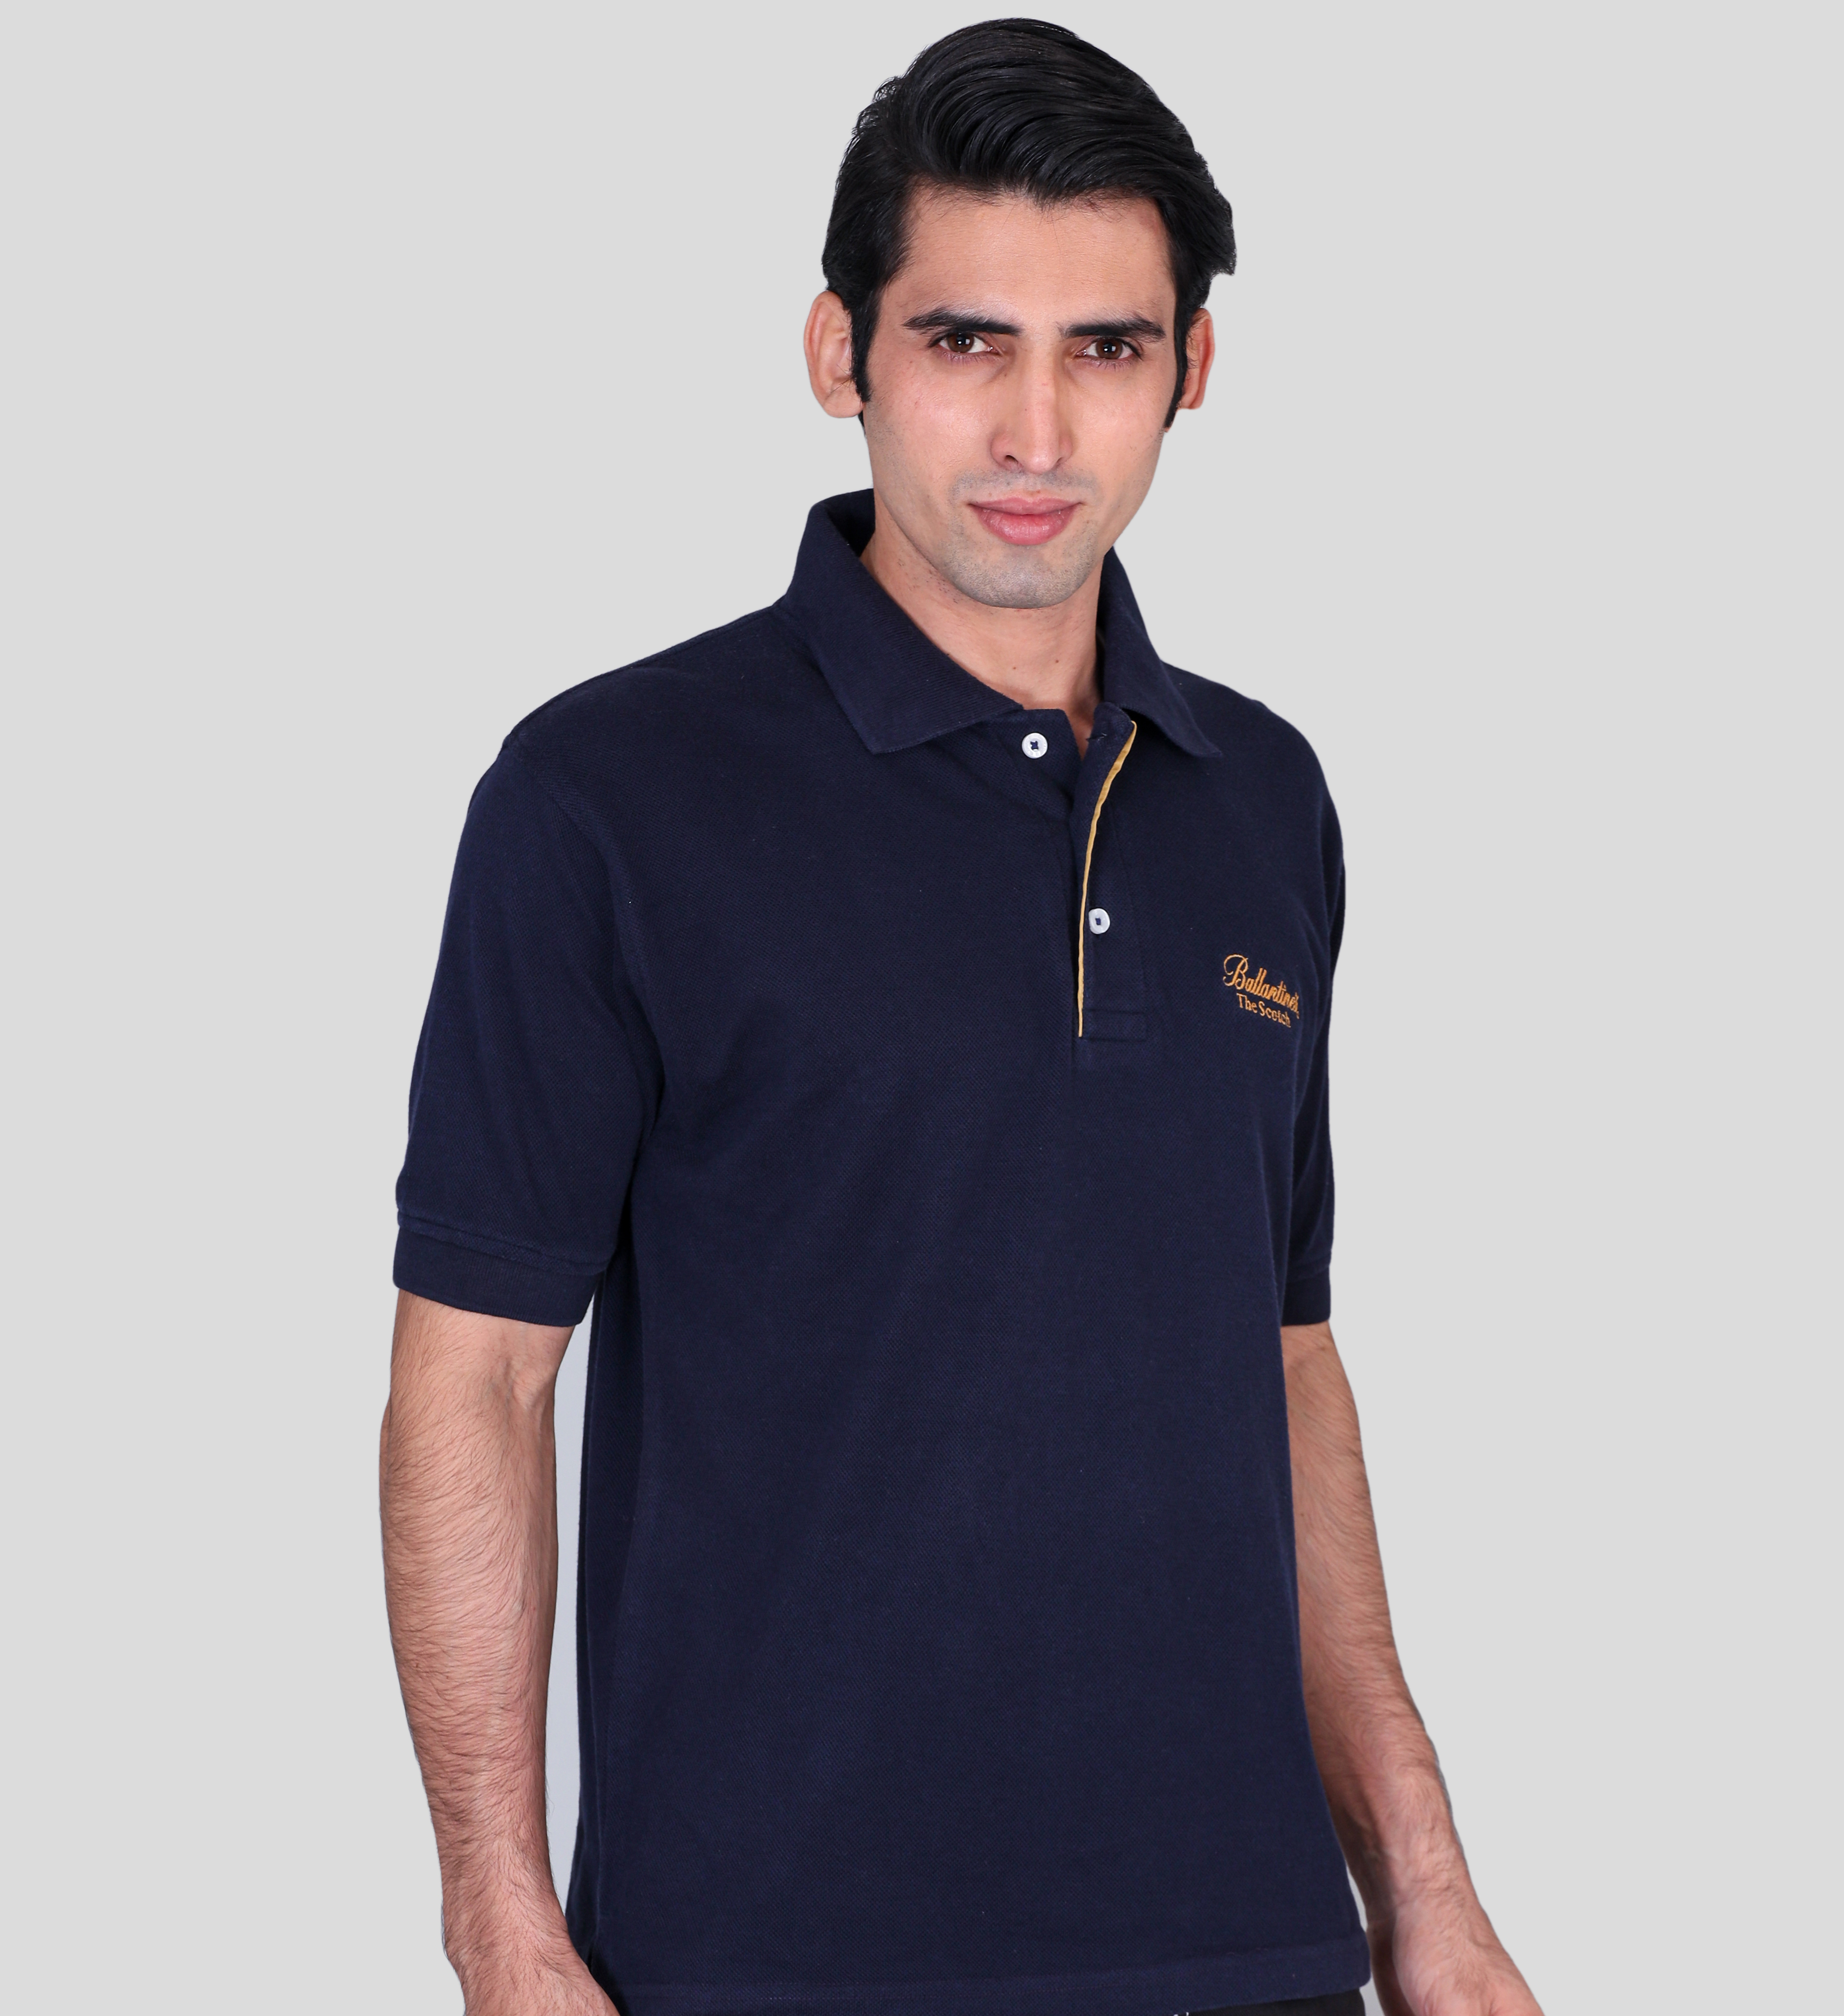 Ballantines navy blue promotional polo t-shirts supplier 